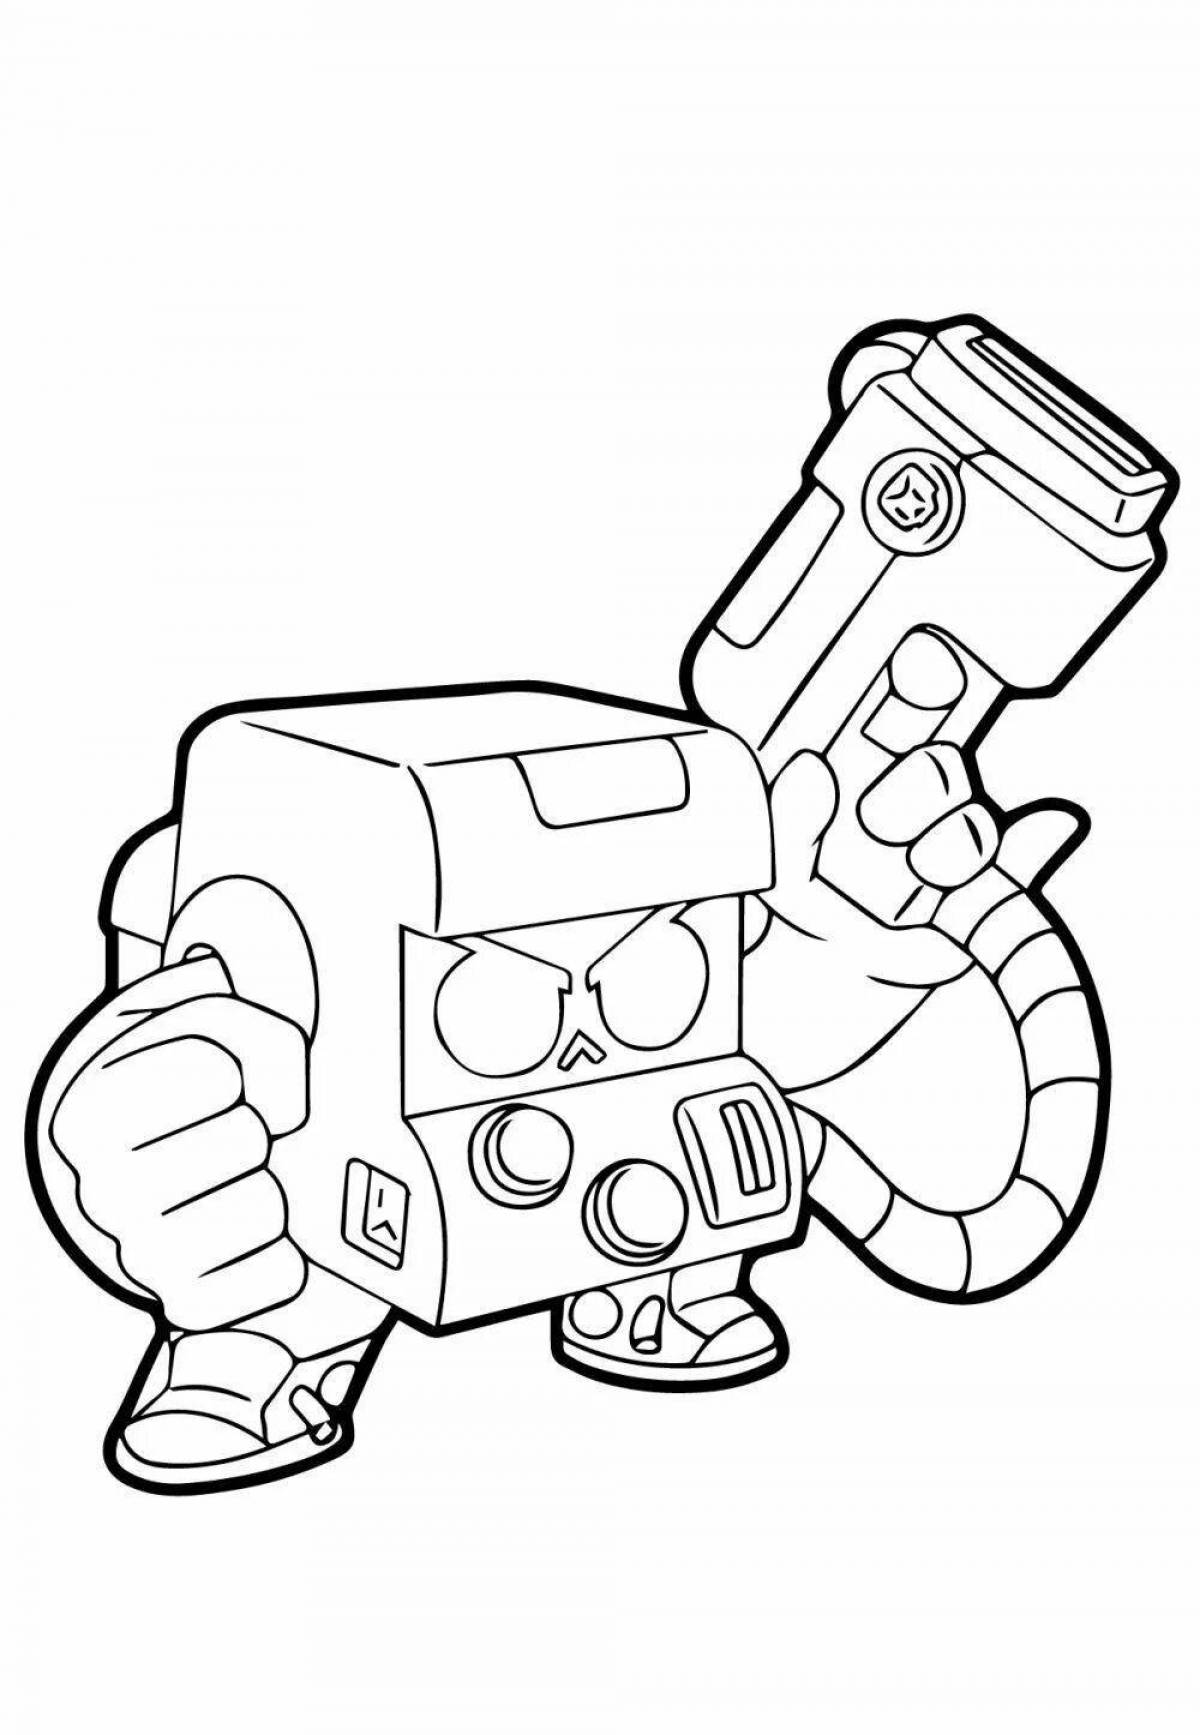 Amazing braver stars coloring pages for kids